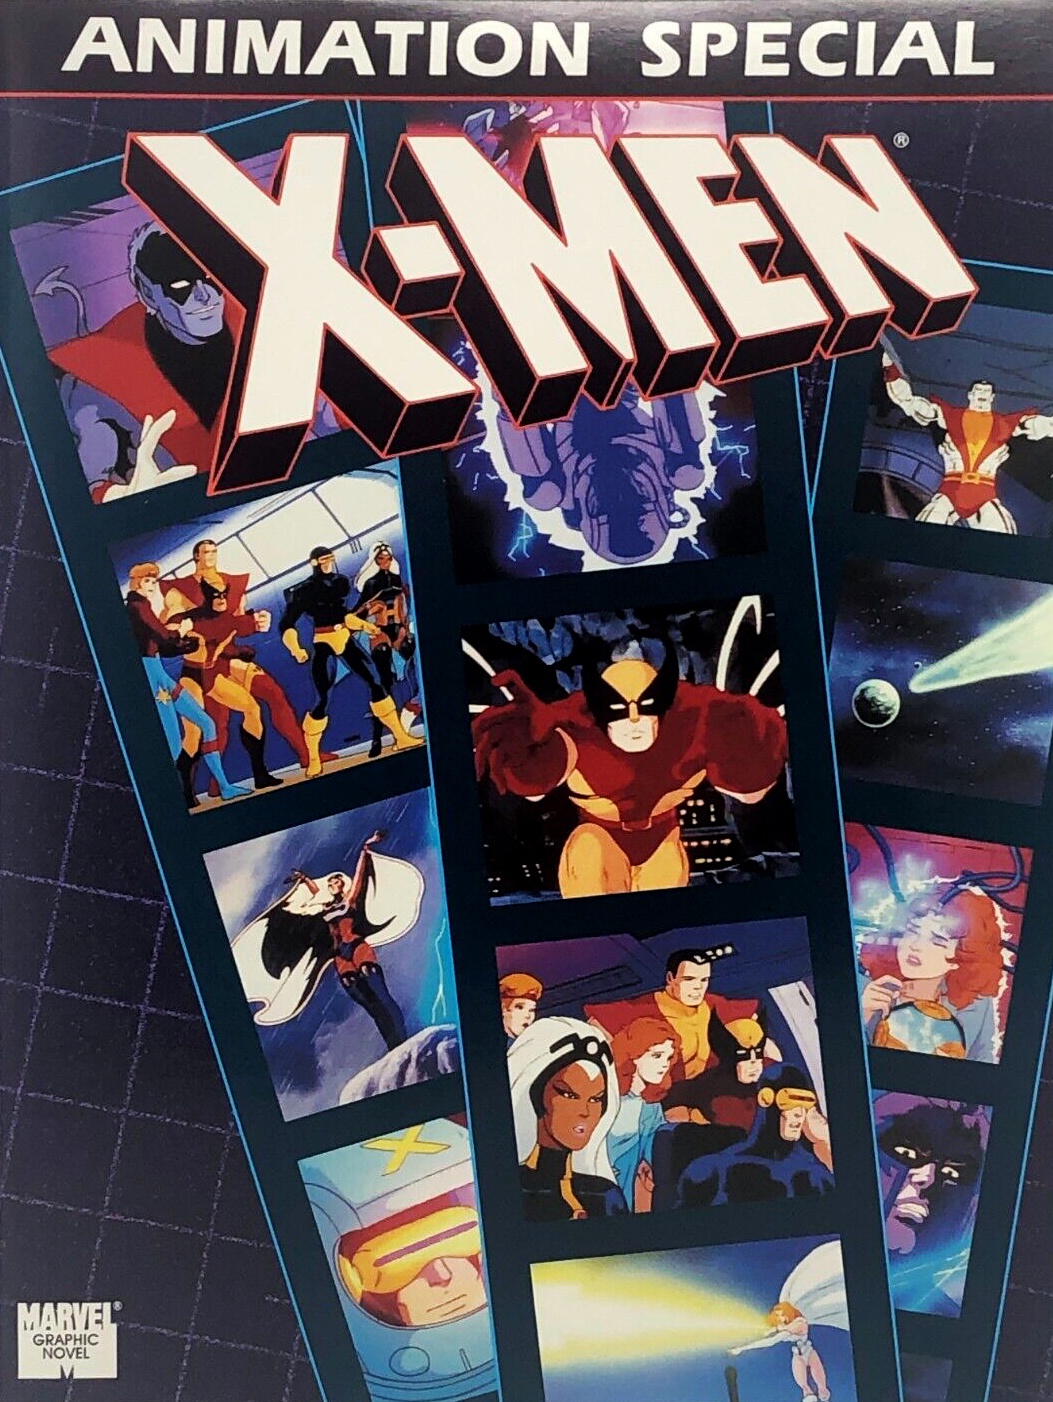 X-Men Animation Special graphic novel that adapted the Pryde of the X-Men animated episode